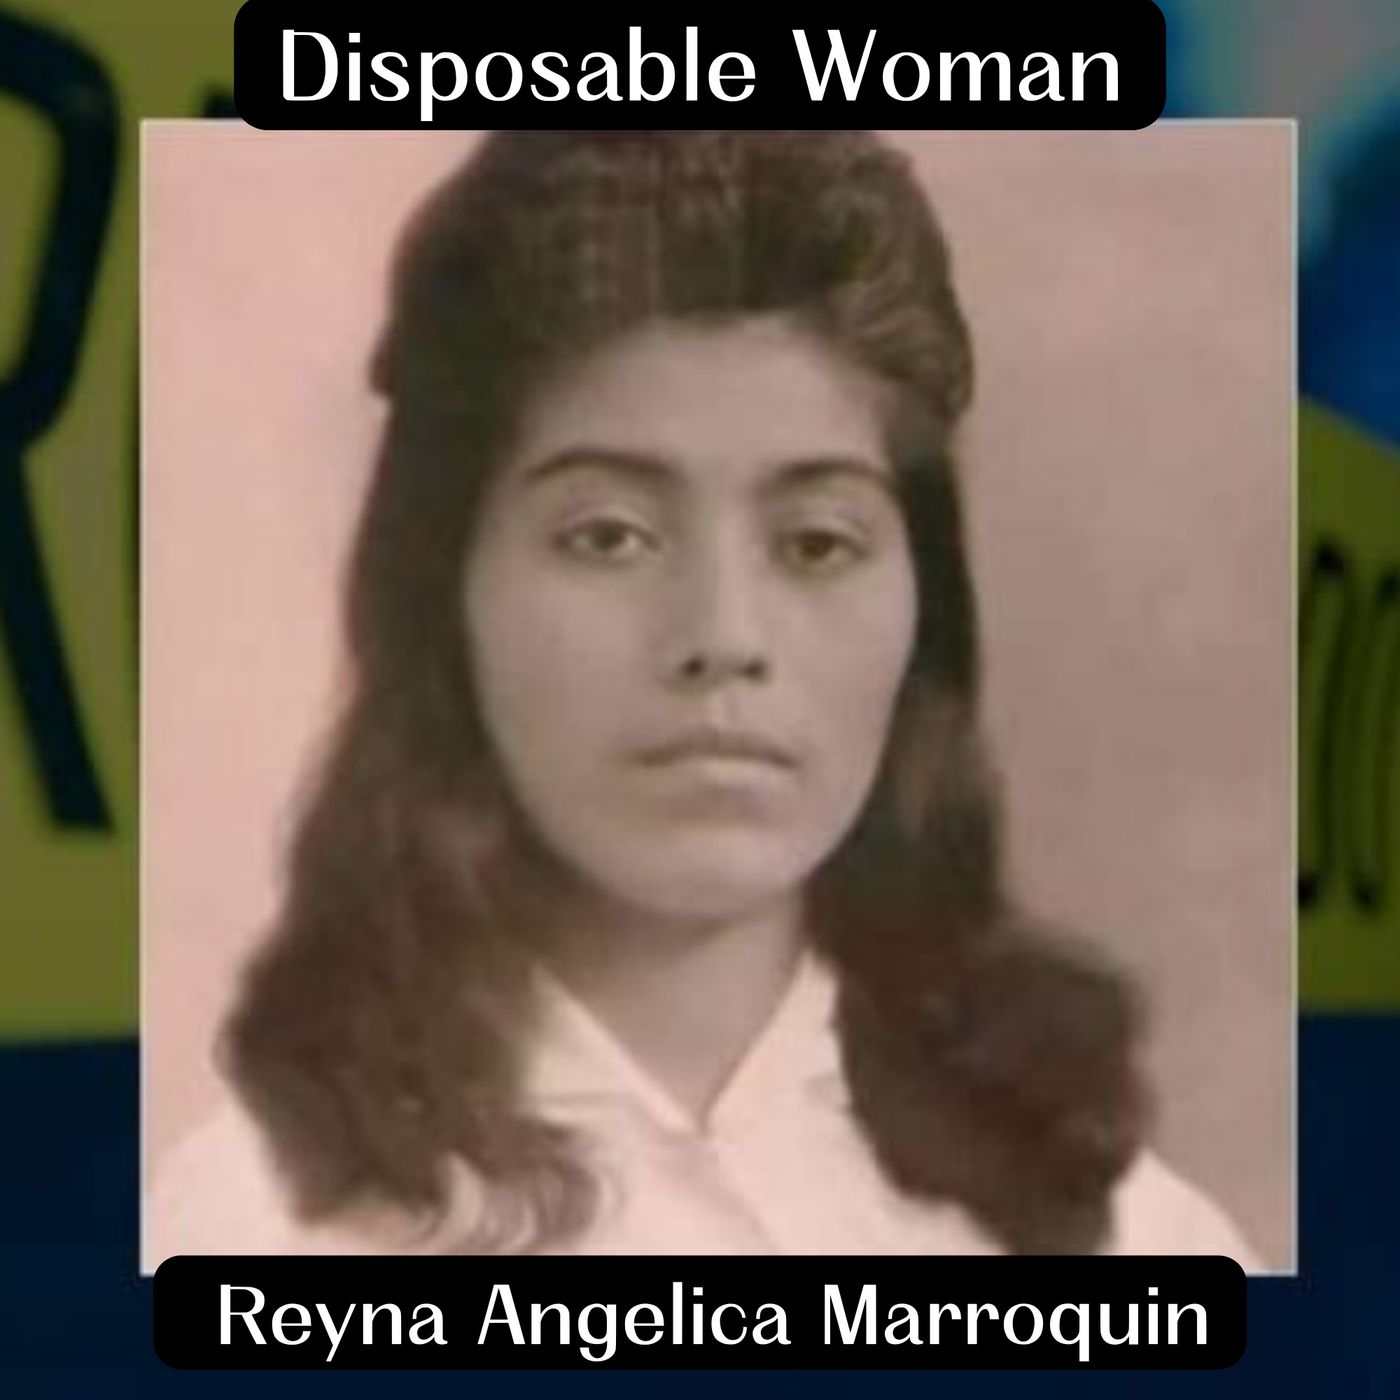 Disposable Woman: Reyna Angelica Marroquin